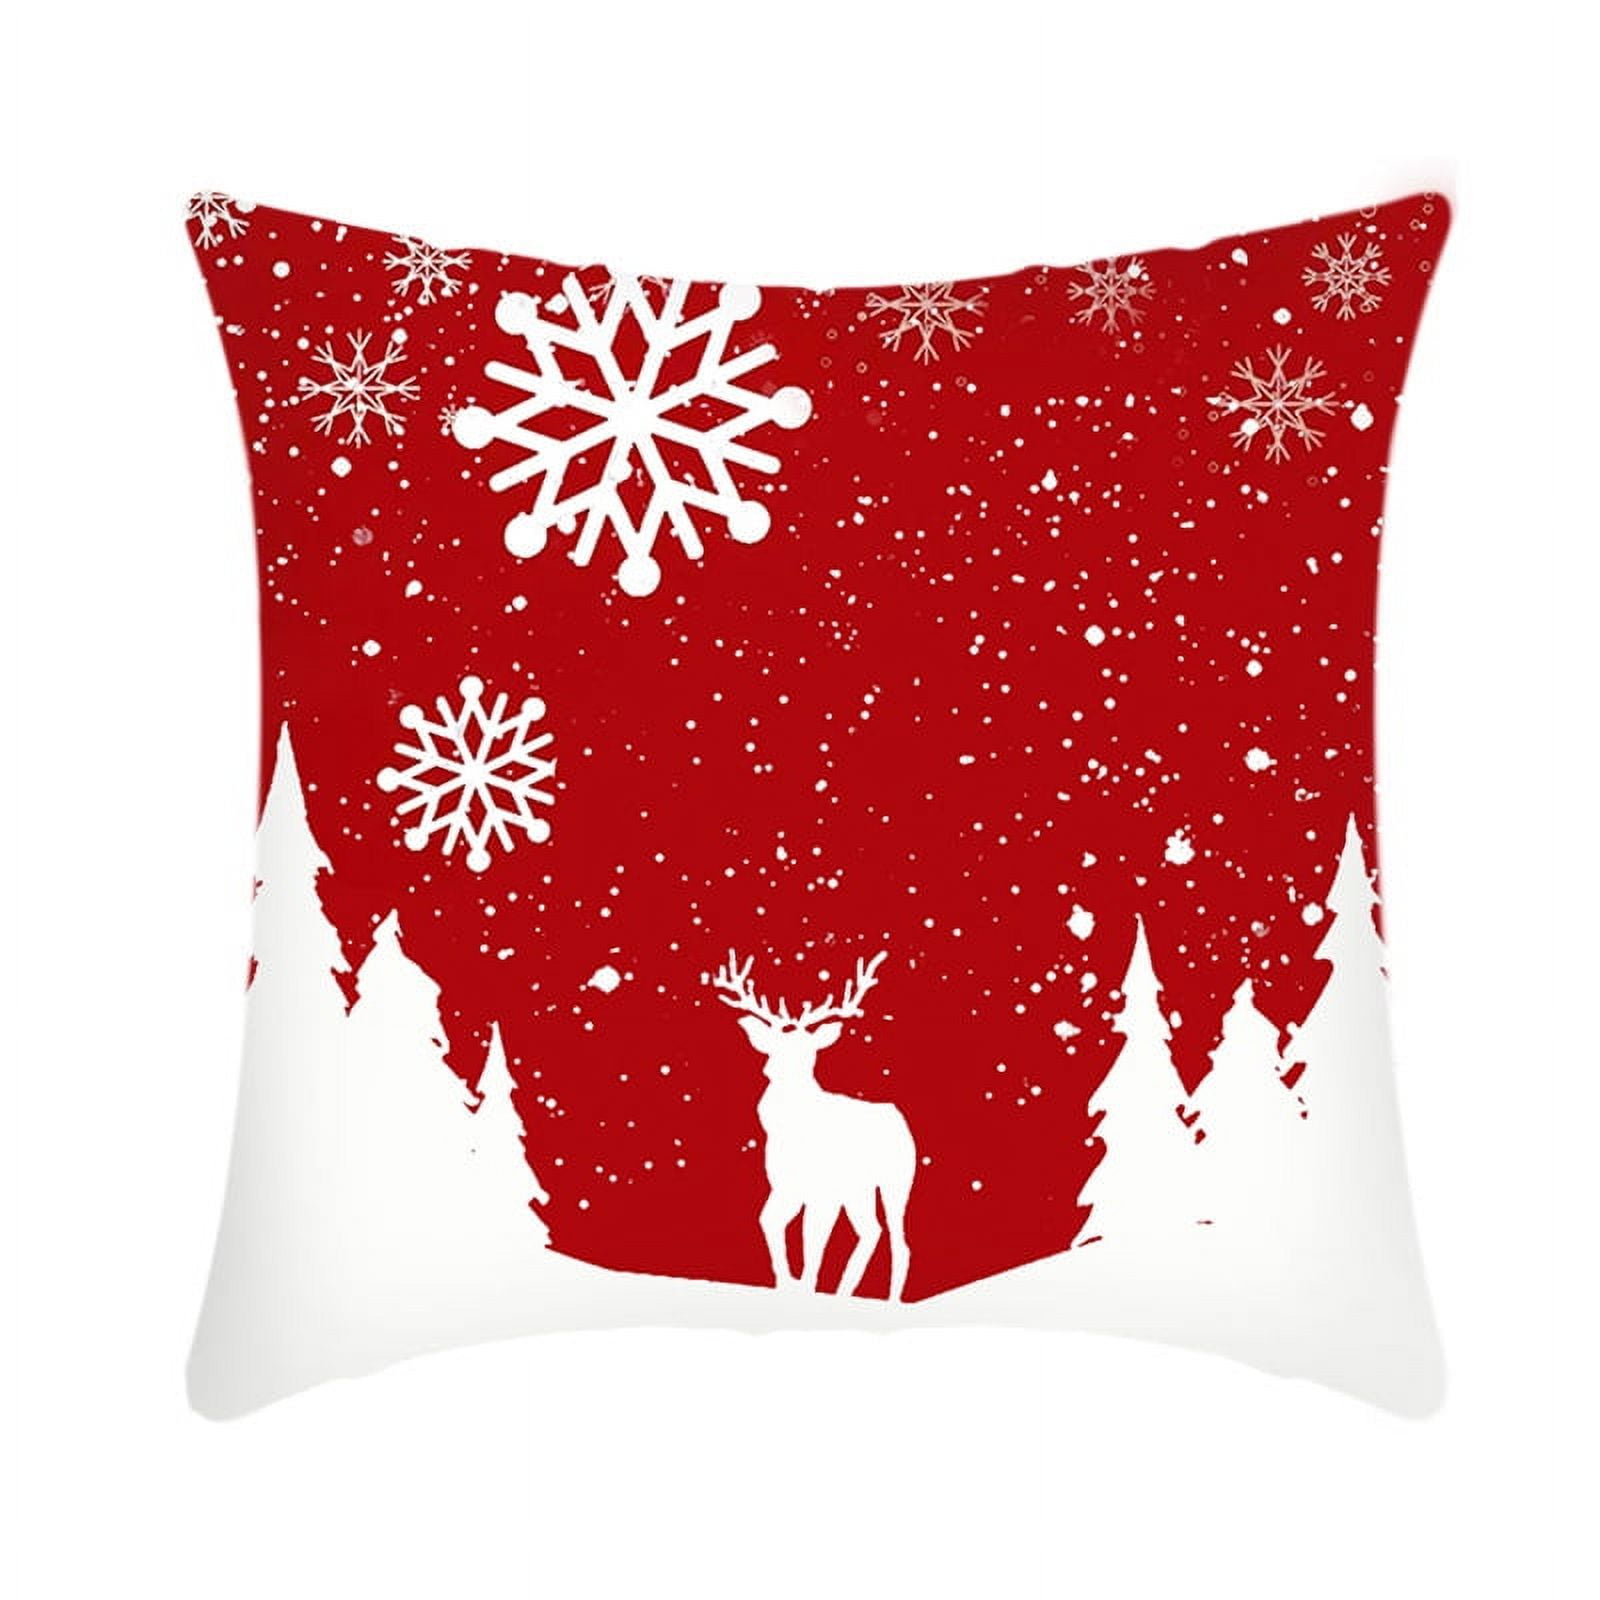  Outdoor Pillows Covers with Inserts 1PCS, Christmas Snowman  Snowflake Red Bird Xmas Style Waterproof Pillow with Adjustable Strap  Decorative Throw Pillows for Patio Furniture Lounge Chair, 12x20 Inch :  Patio, Lawn